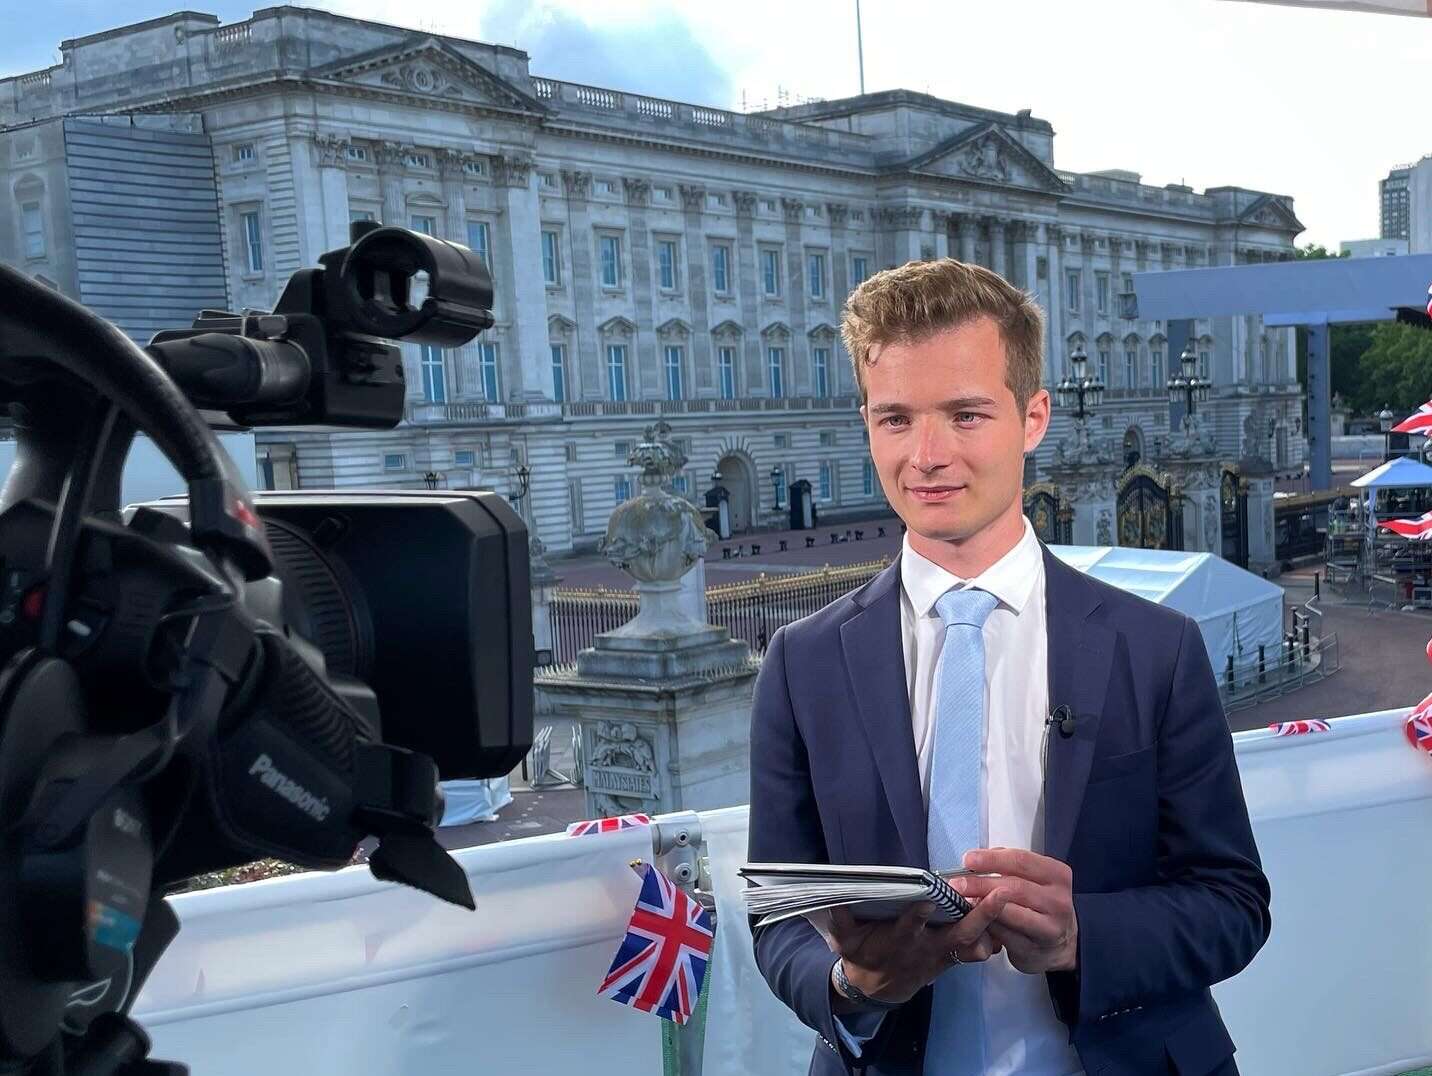 GB News royal reporter recalls going into deep end for Queen's death coverage: 'Would we be ready?'